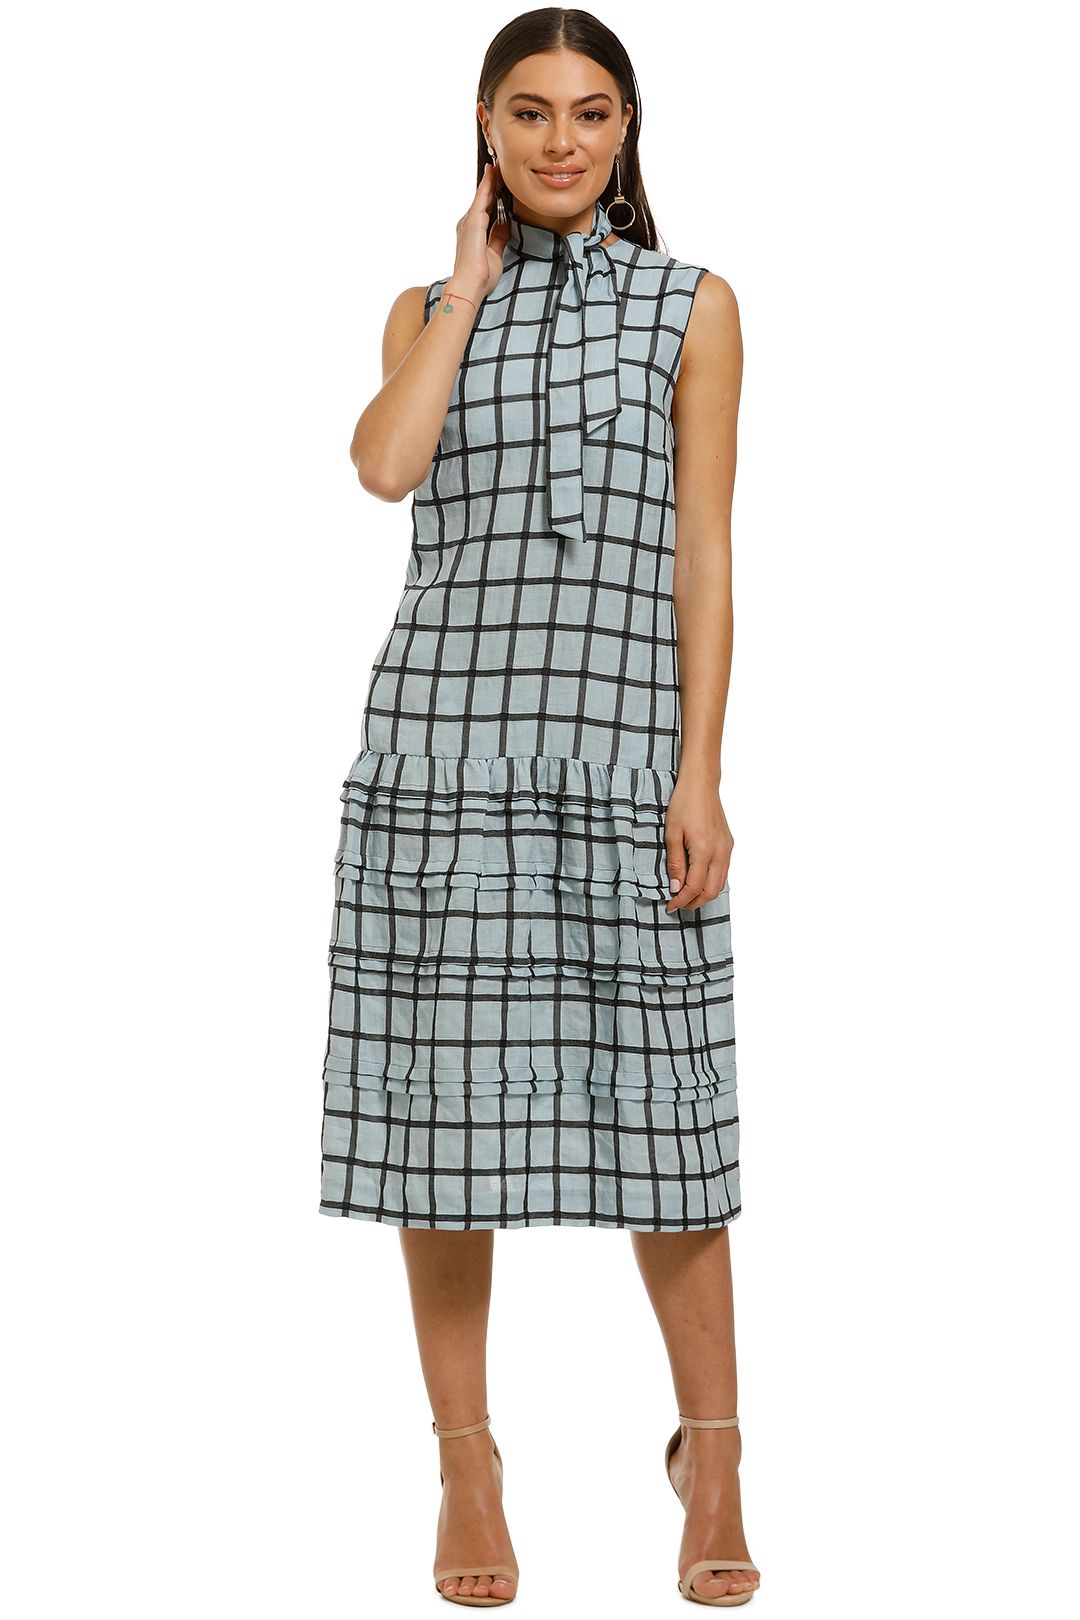 Stevie-May-Manners-Midi-Dress-Aqua-Large-Check-Front